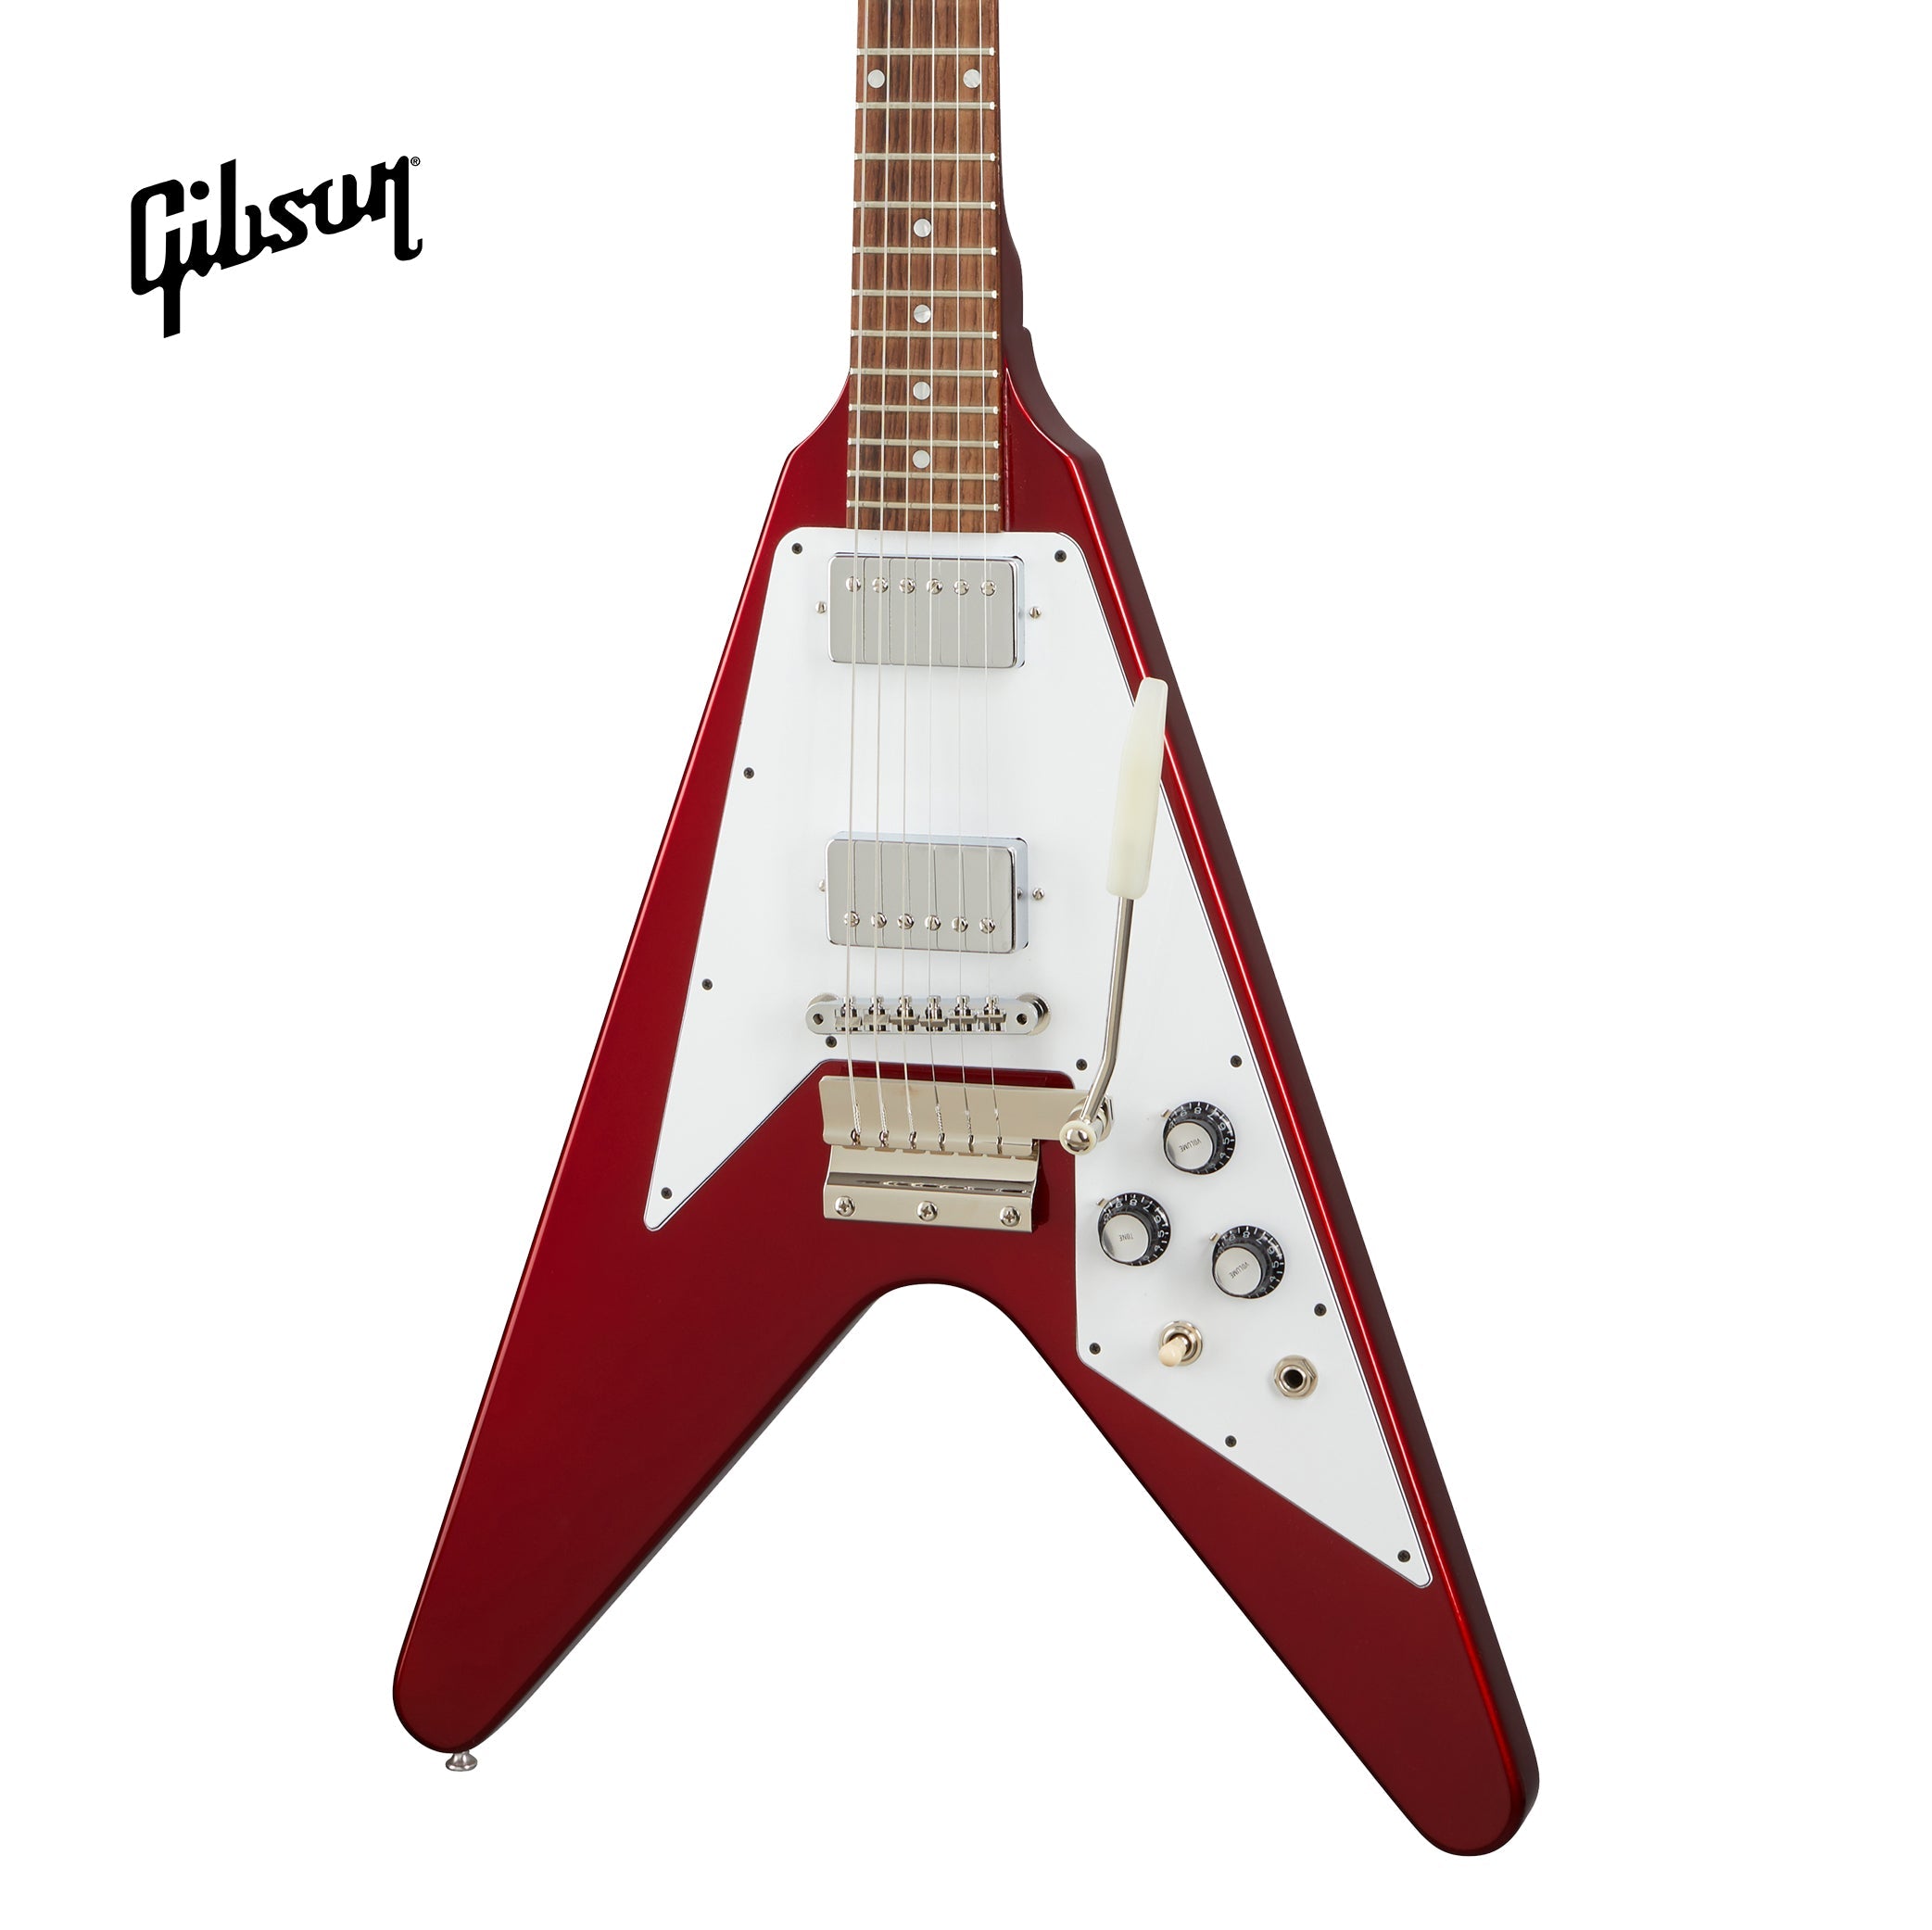 GIBSON 1967 MAHOGANY FLYING V REISSUE WITH MAESTRO VIBROLA GLOSS ELECTRIC GUITAR - SPARKLING BURGUNDY